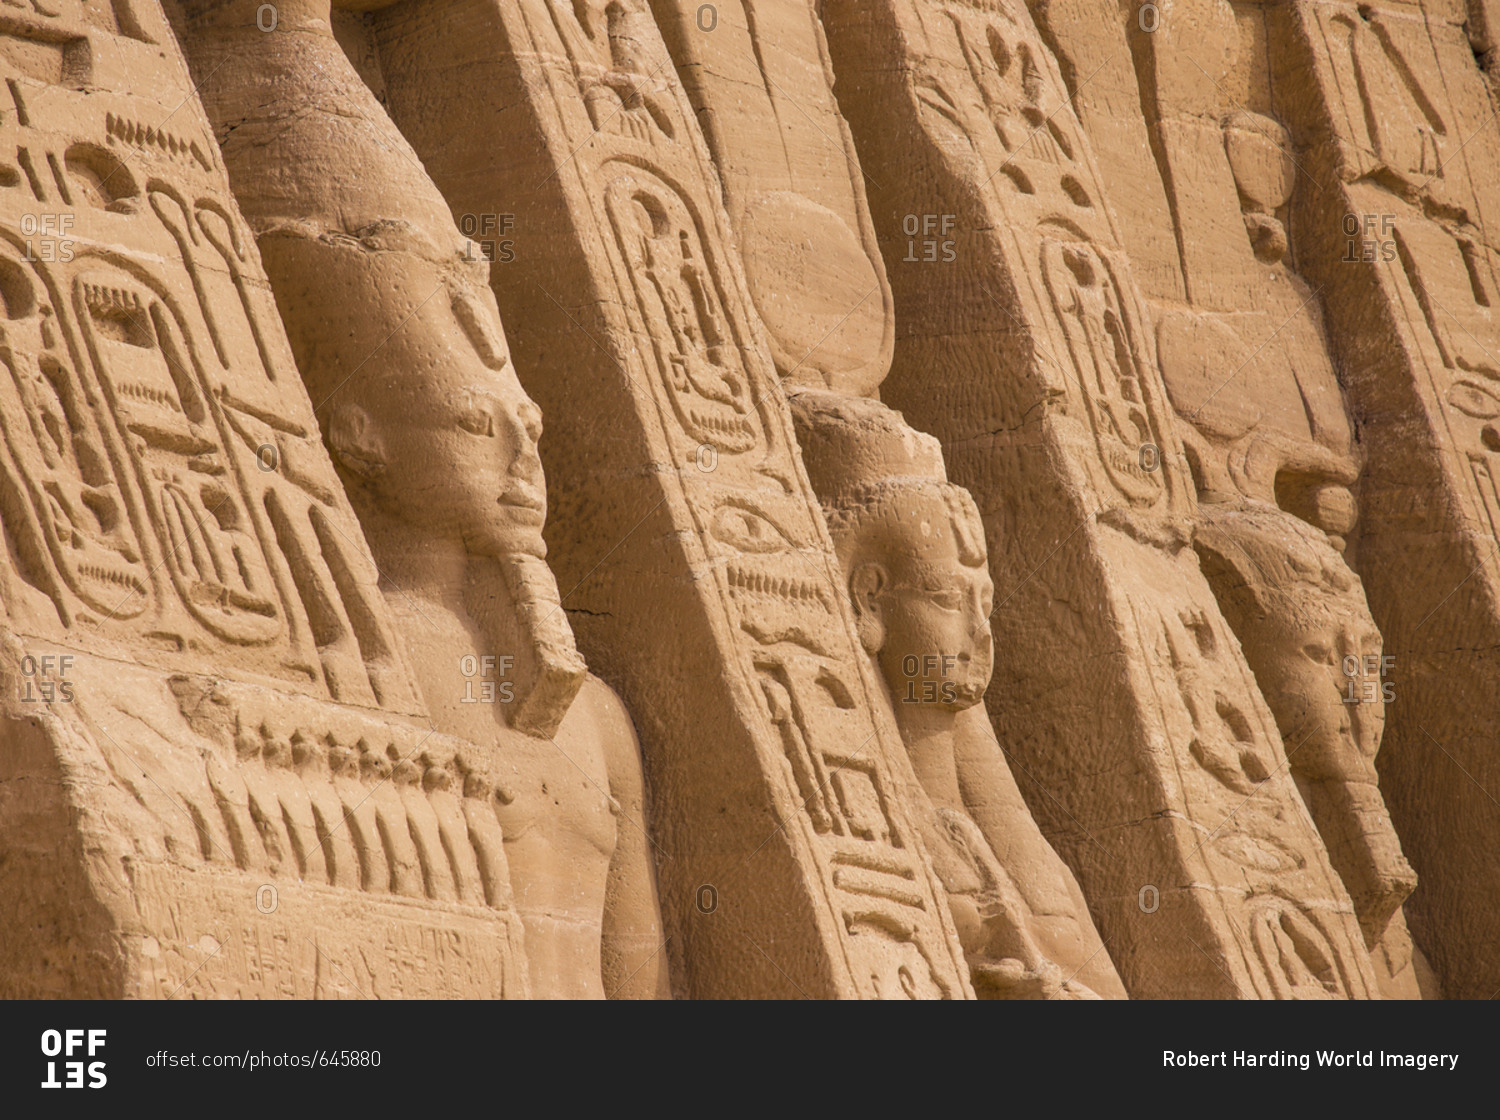 The small temple, dedicated to Nefertari and adorned with statues of the King and Queen, Abu Simbel, UNESCO World Heritage Site, Egypt, North Africa, African